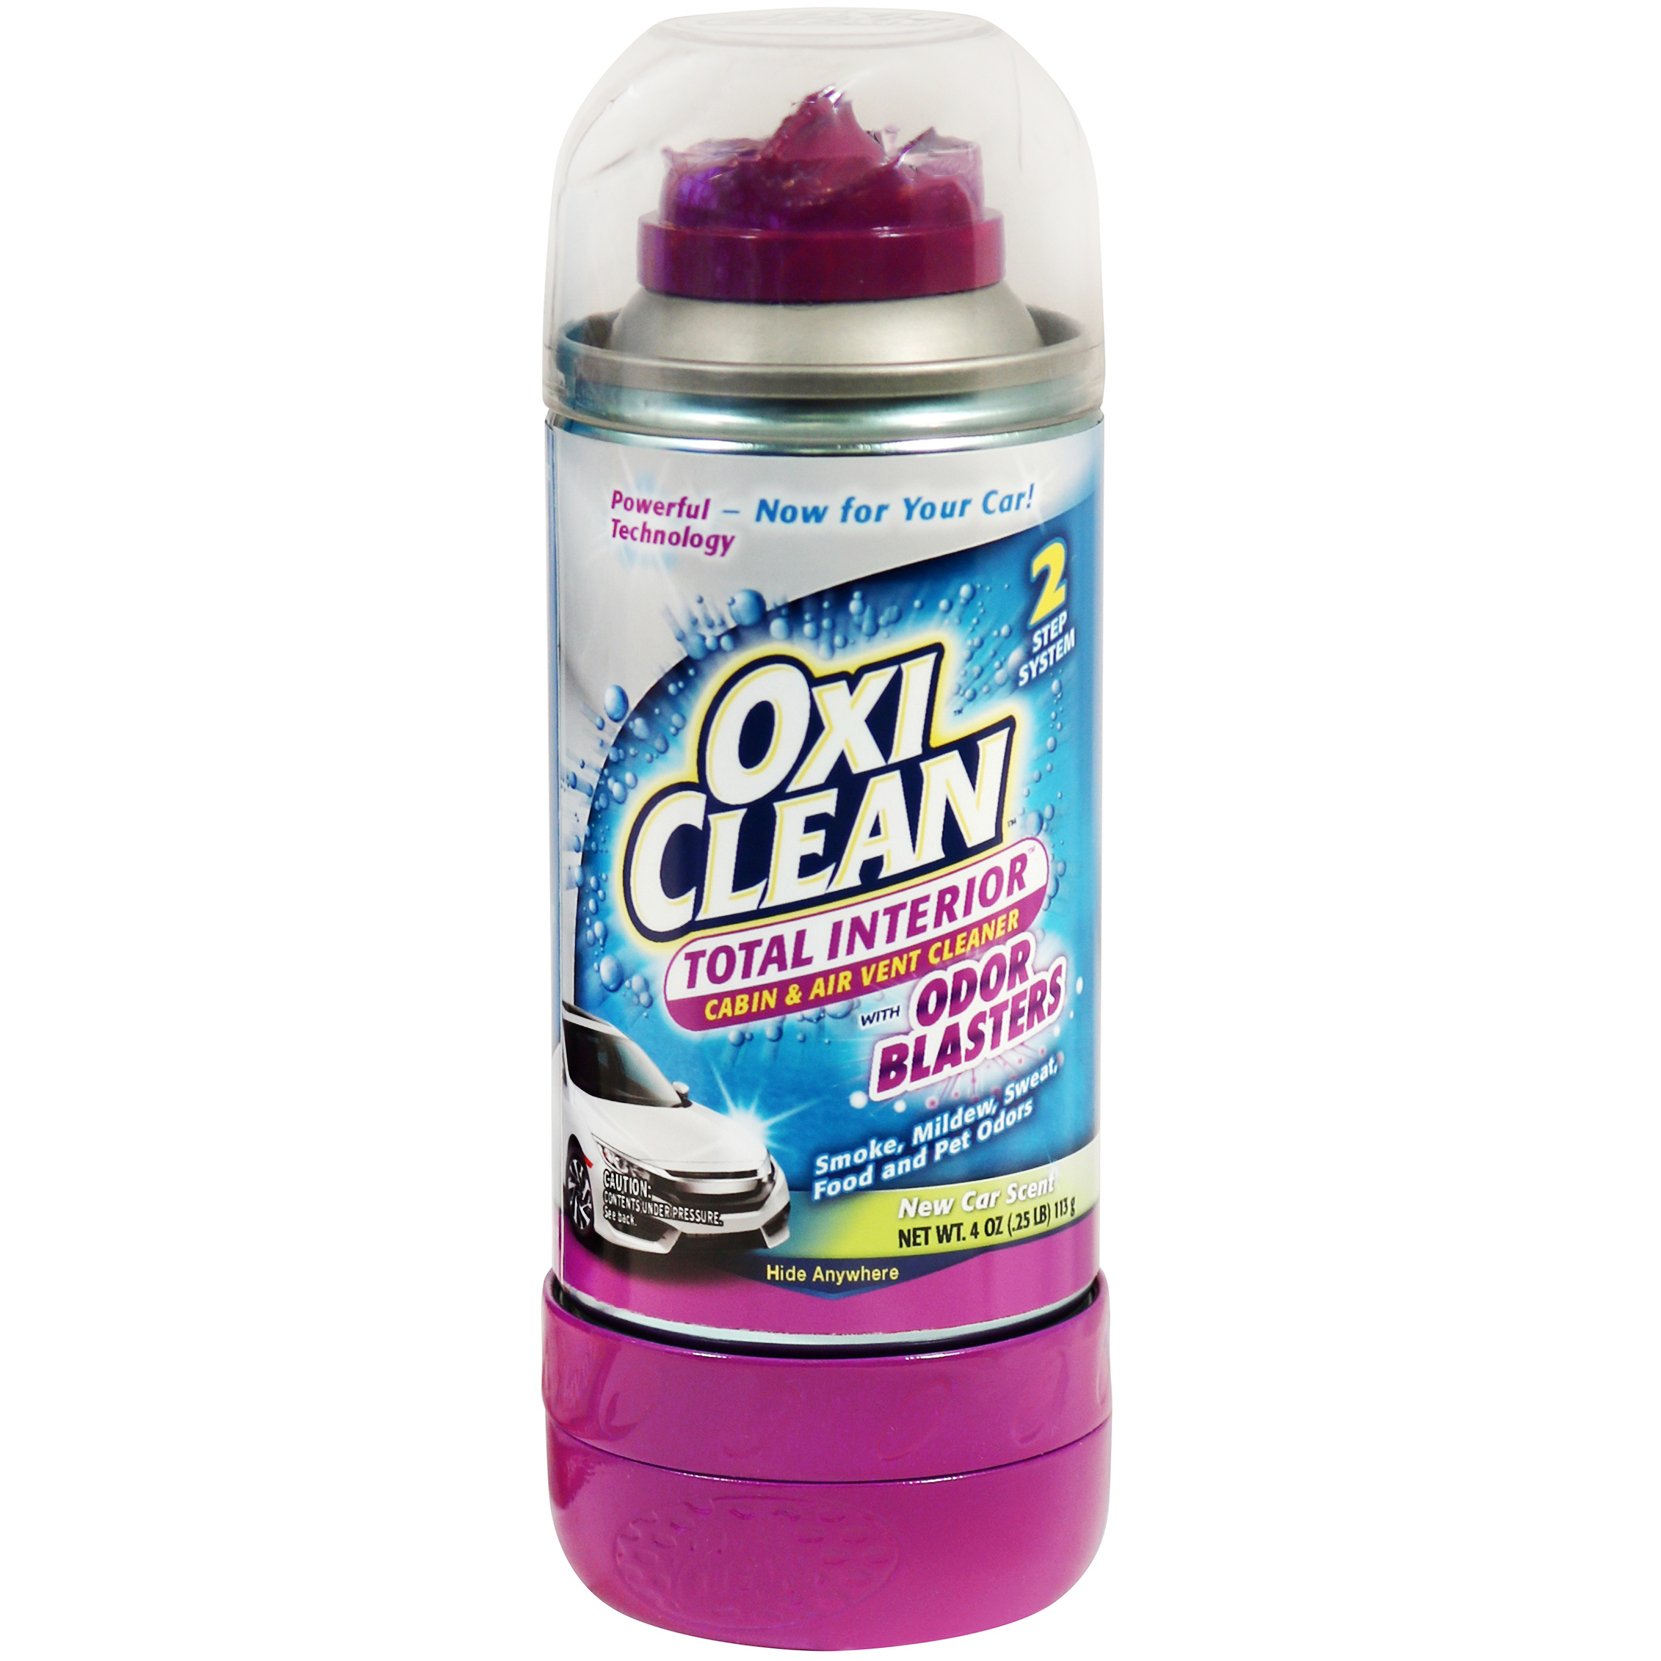 Clean Air Duct Treatment - How to chemically neutralize odors in your car 